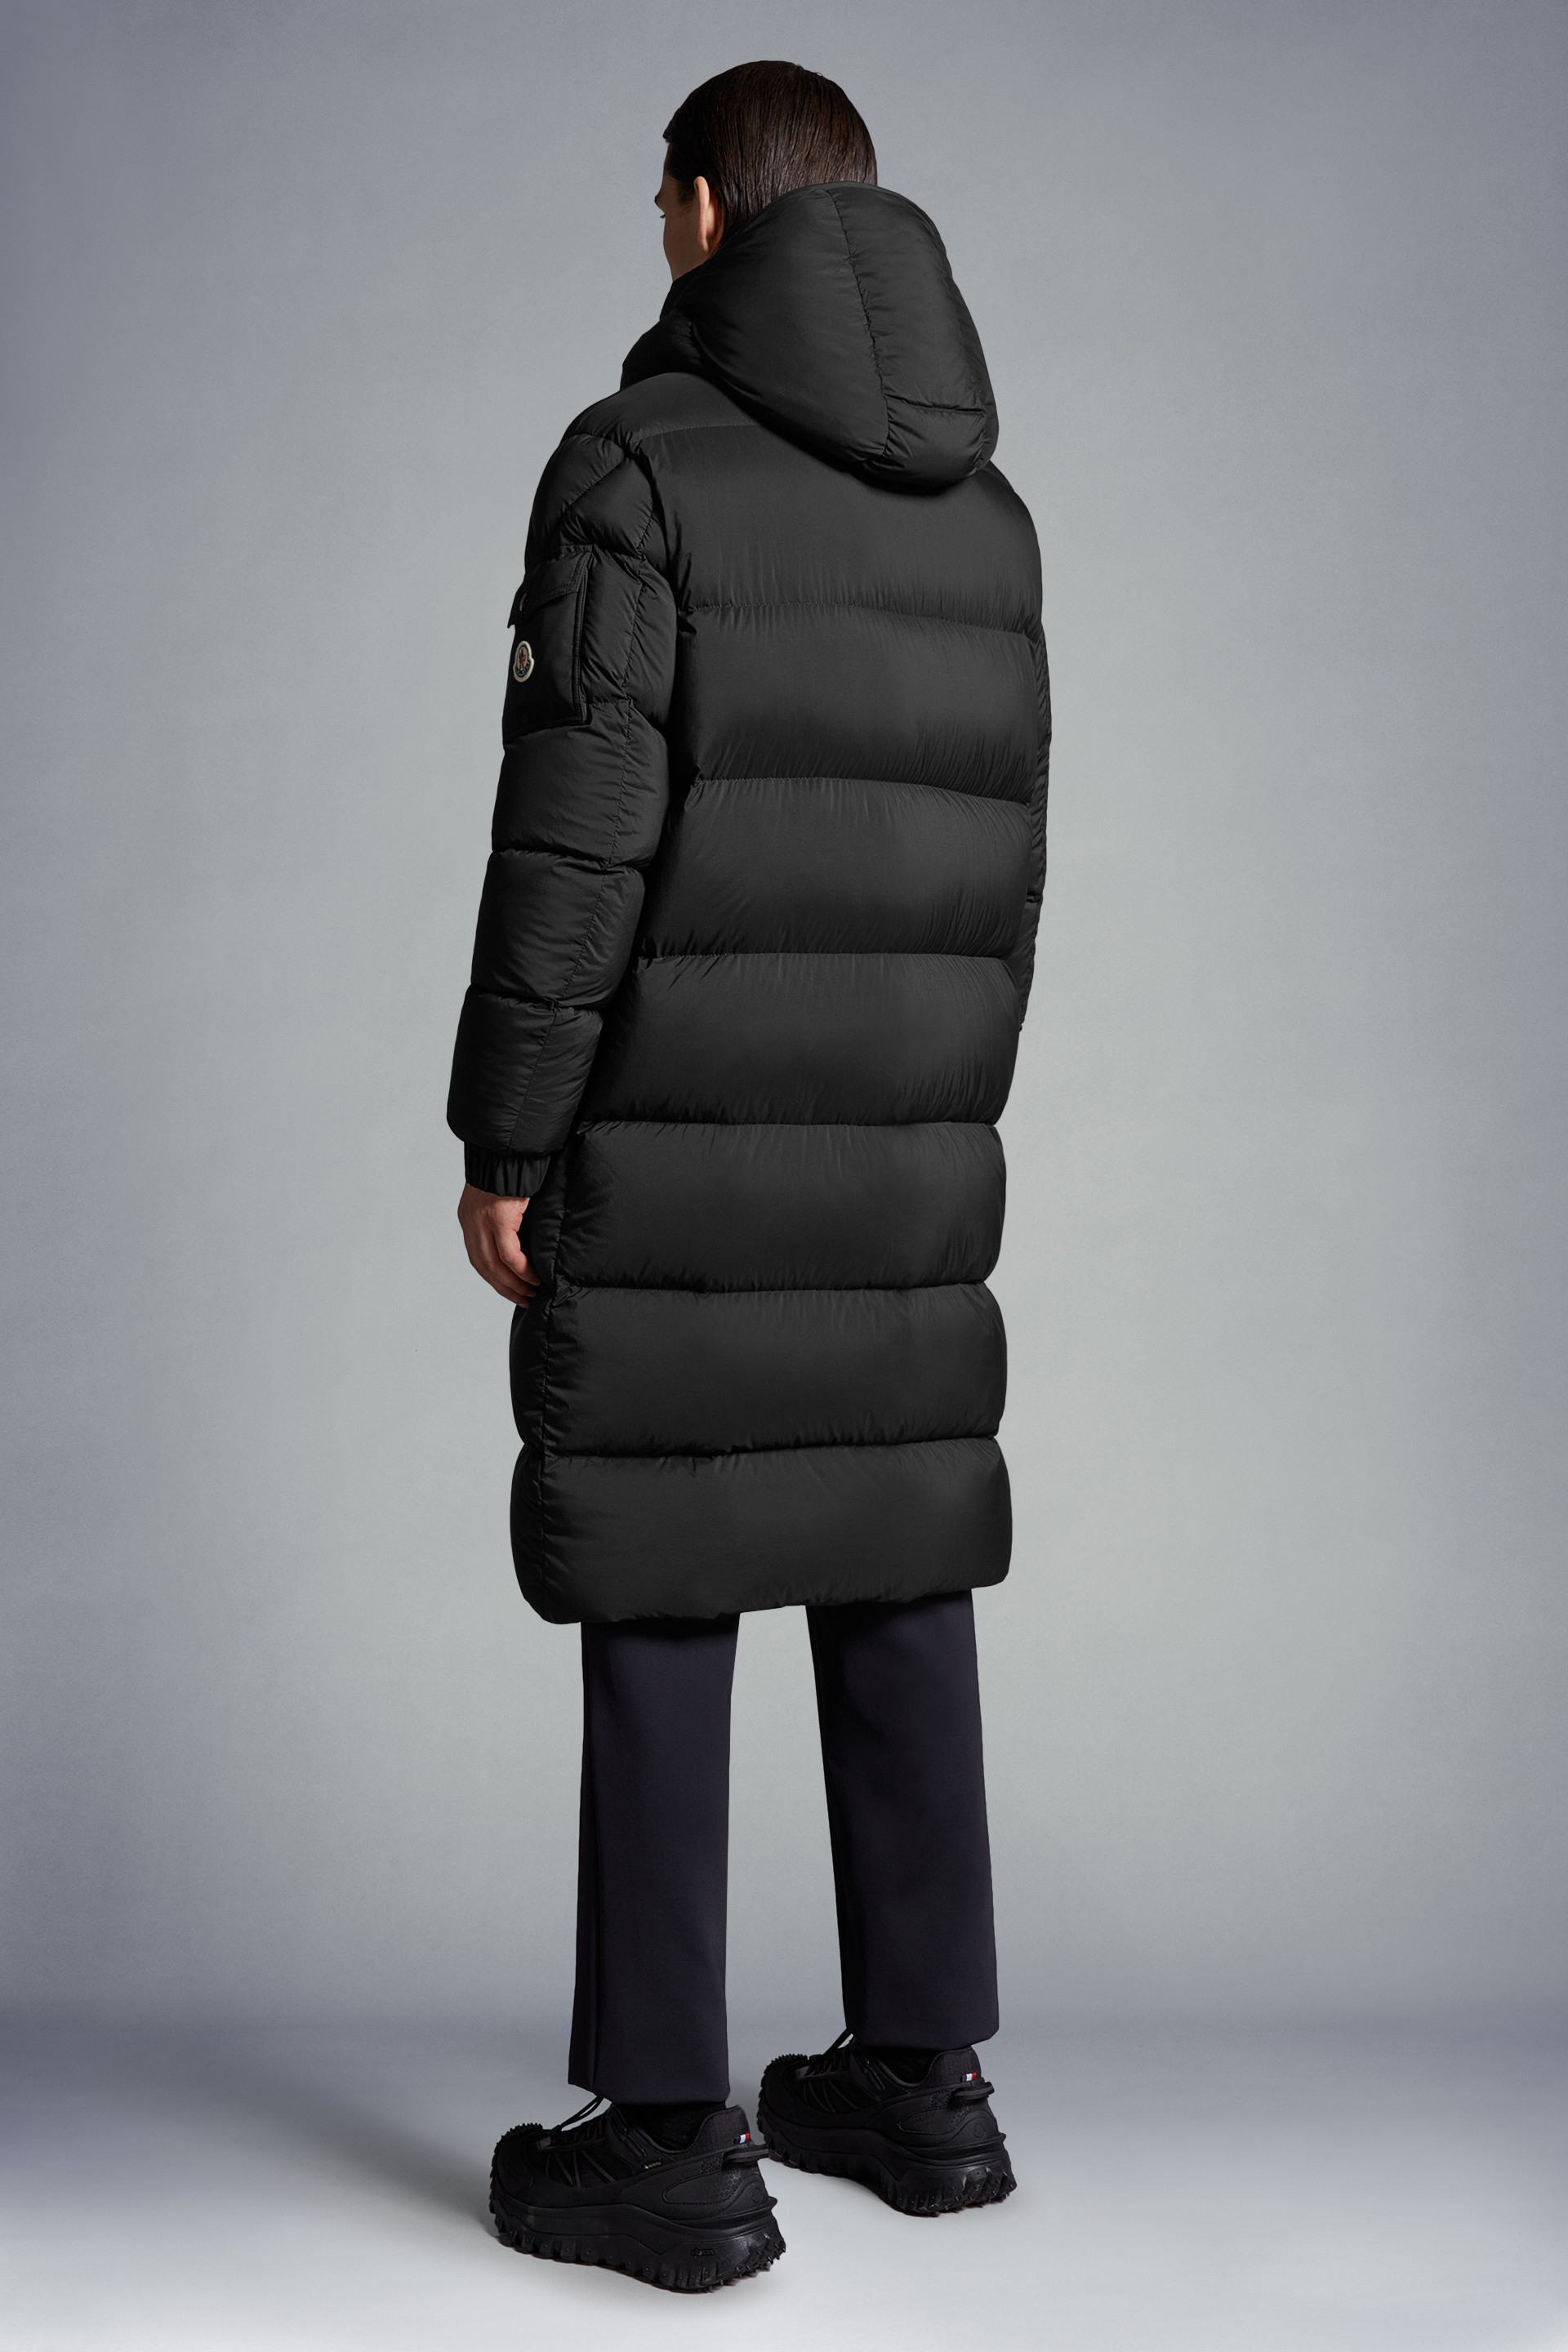 Moncler Jackets & Clothing In Australia